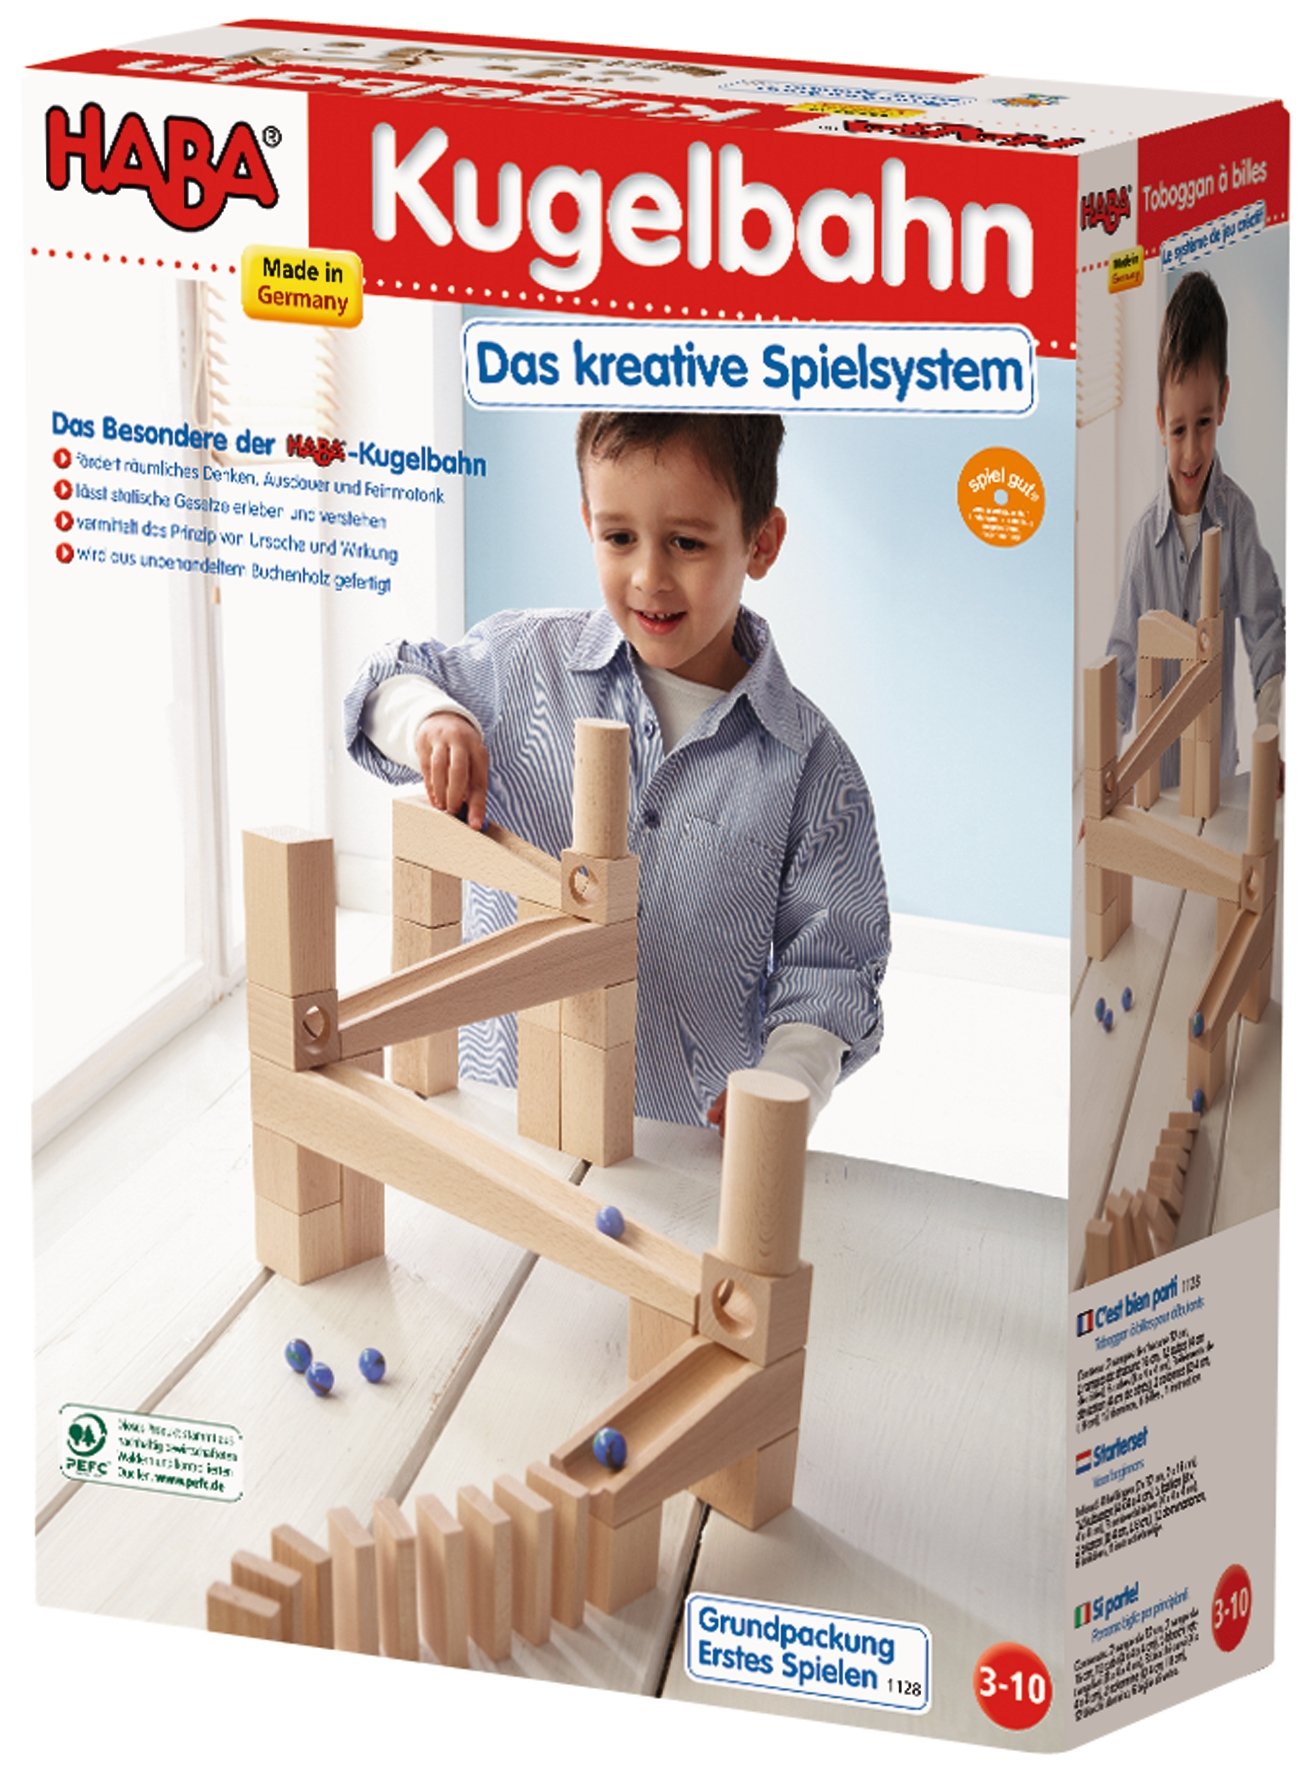 HABA Ball Track Starter Set - 44 Piece Wooden Marble Run for Beginner to Expert Architects Ages 3 to 10 (Made in Germany)